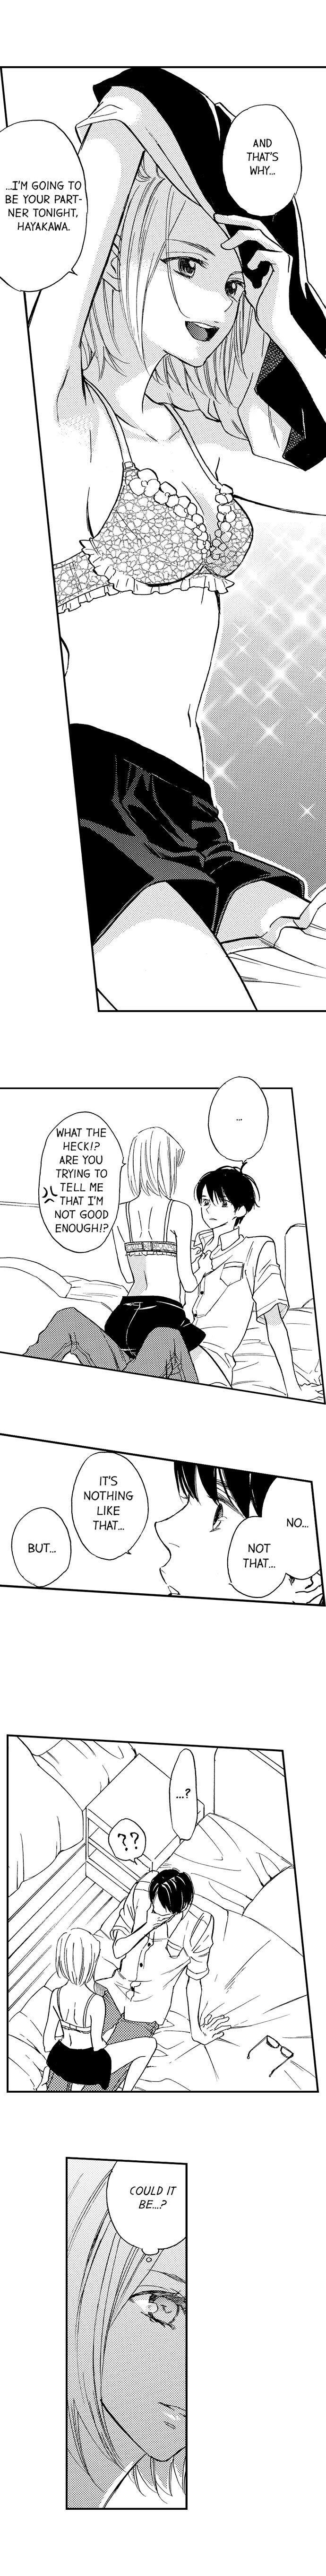 Mandatory Sex Class in Another World Chapter 18 - Page 5